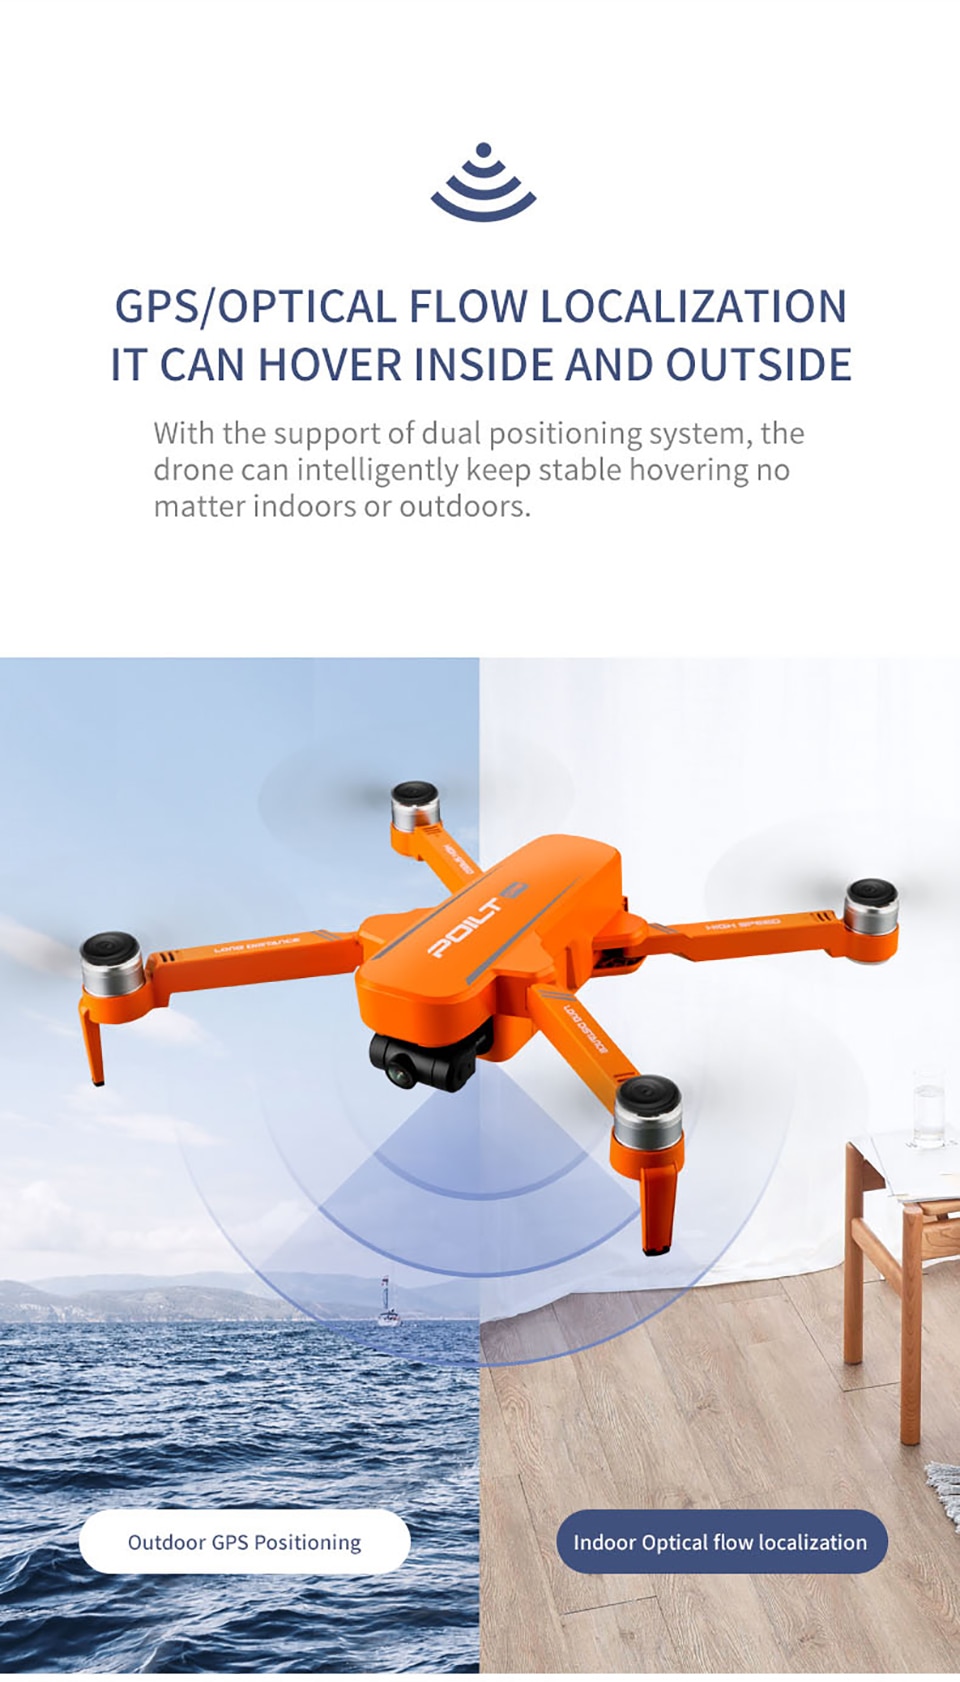 JJRC-X17-Professional-Drone-GPS-Camera-HD-4K-6K-1080p-Quadcopter-FPV-Photography-5G-WiFi-Helicopter--1005001813648565